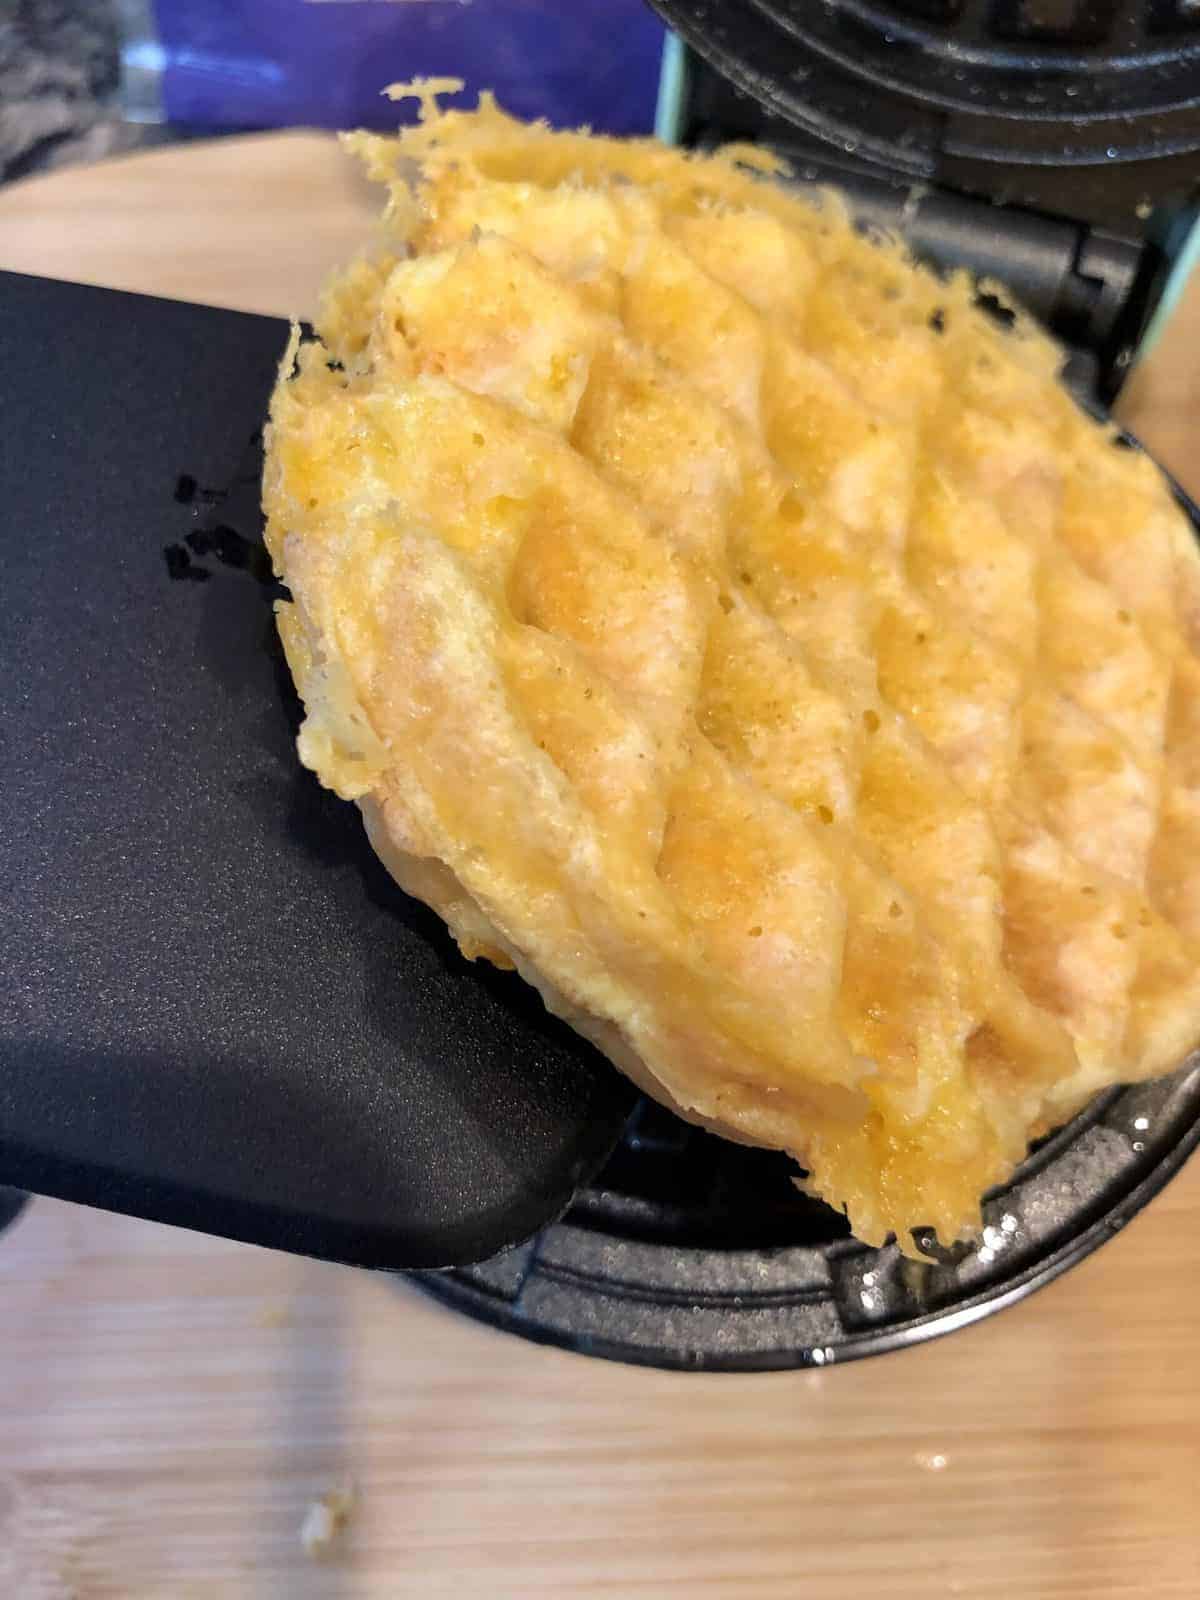 removing the Chaffles from the waffle maker with a black spatula